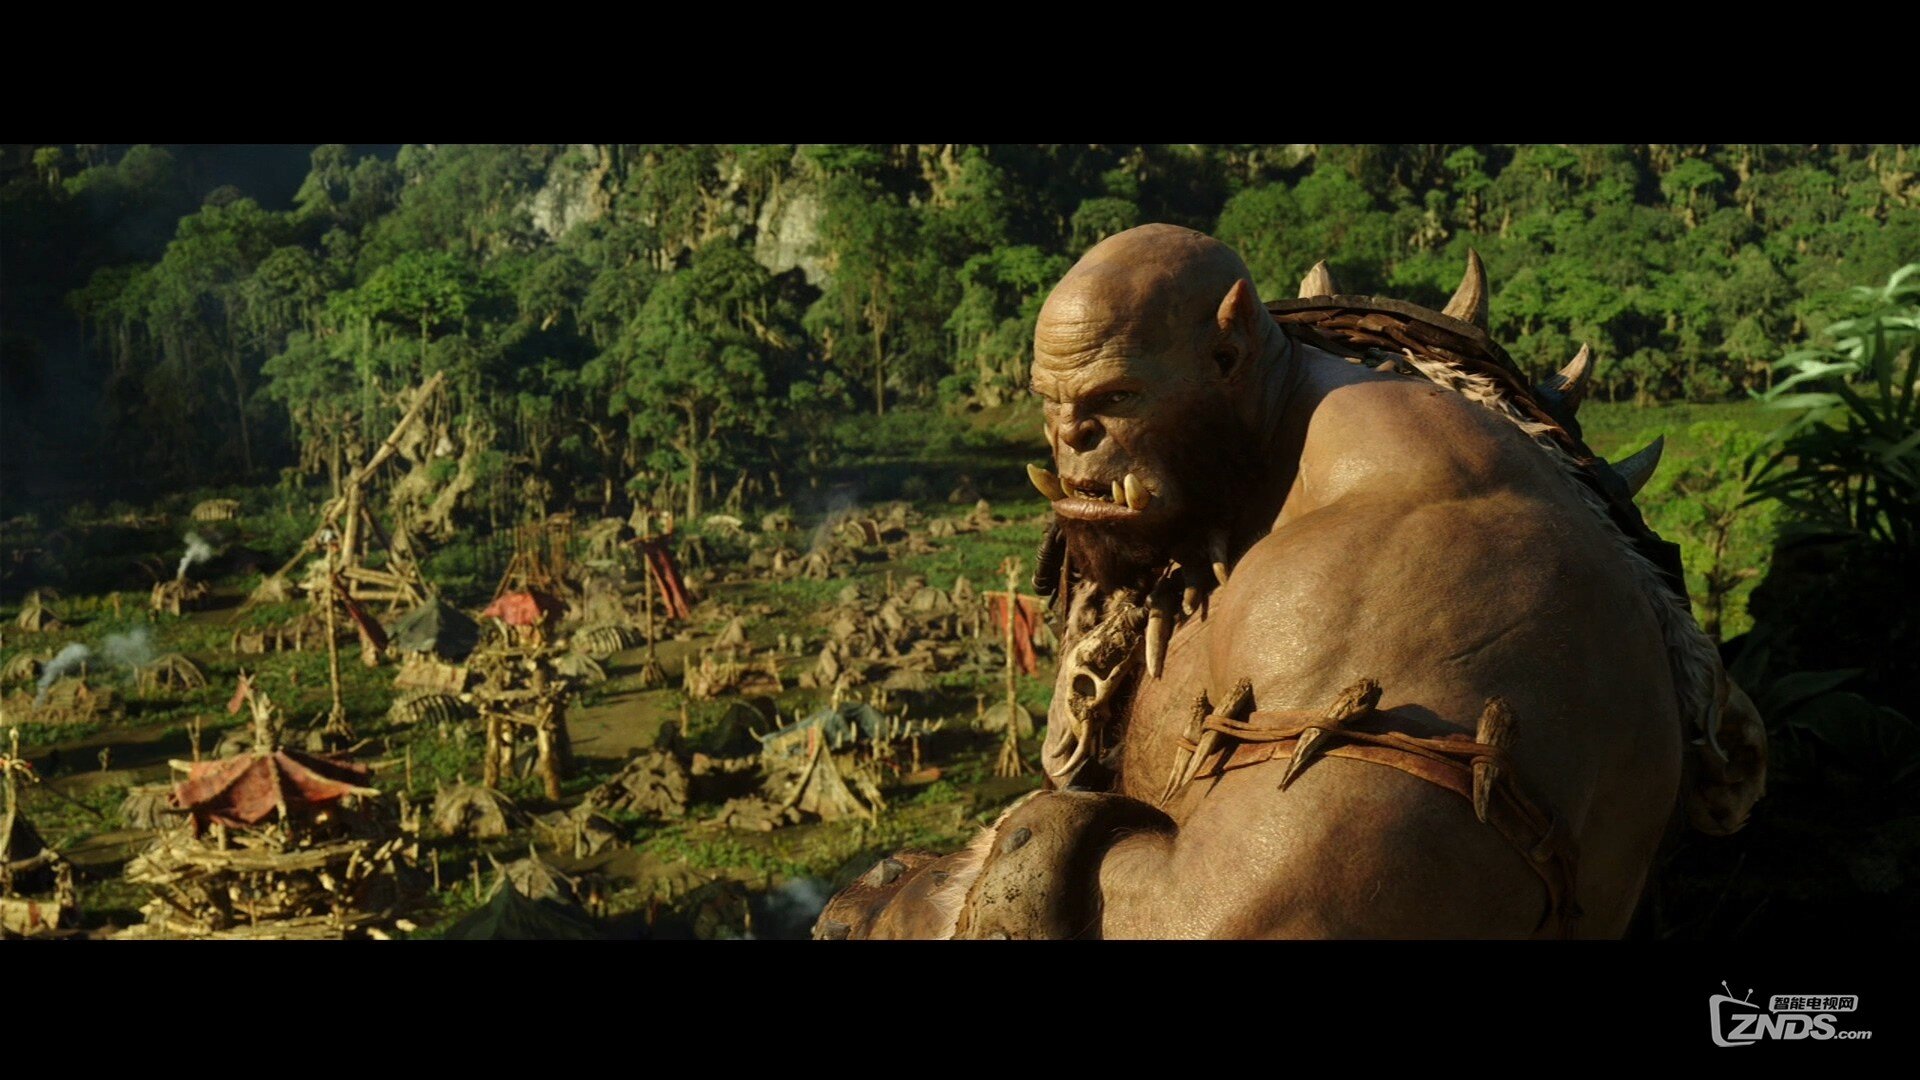 Warcraft_Trailer1_Texted_Stereo_PCM_1080p.mov_20160214_222745.343.jpg